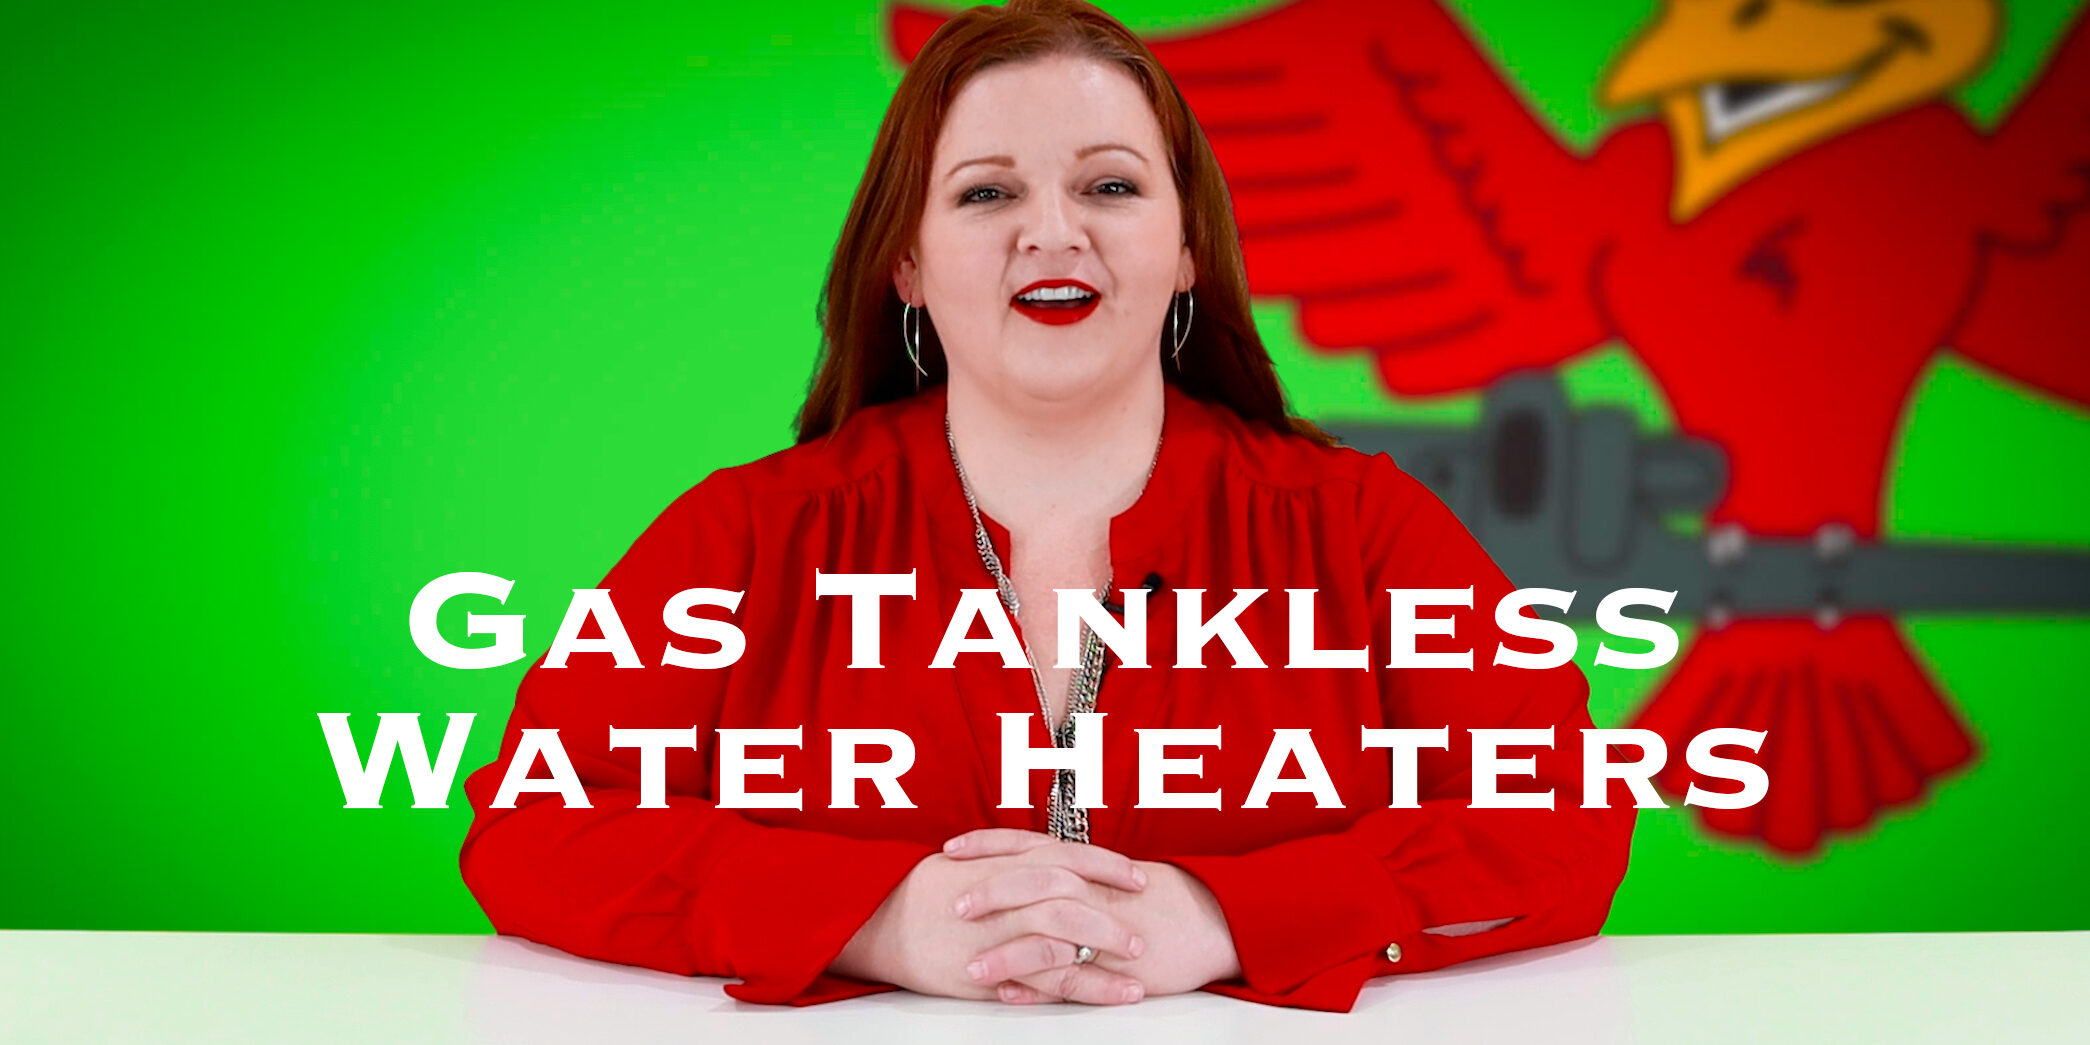 Cover photo for blog and video "Gas Tankless Water Heaters"